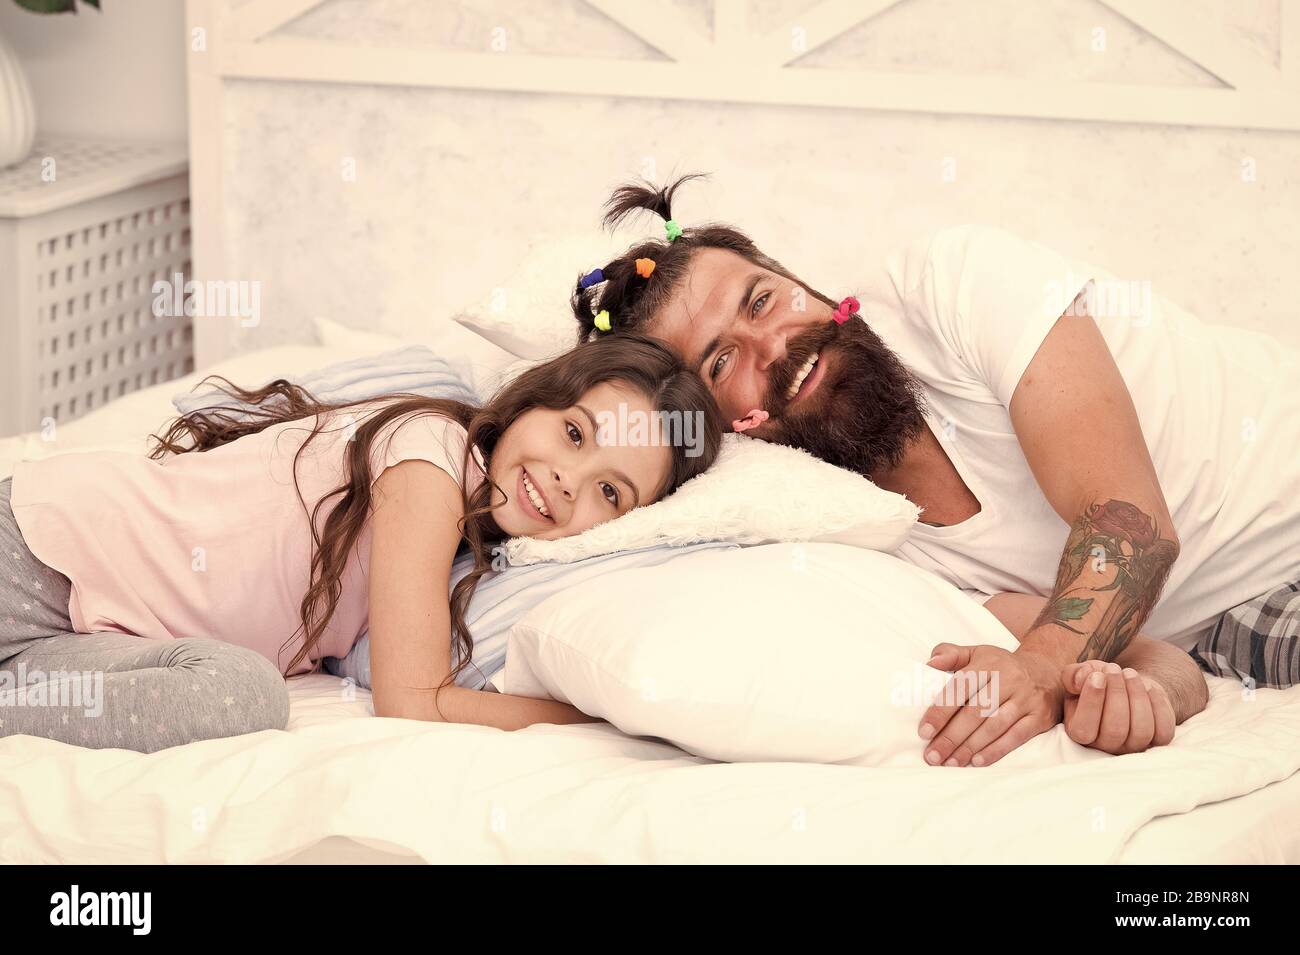 Enjoy better sleep at night. Bearded man put daughter to sleep. Tired child and father go to sleep. Bedtime routine. Got ready for bed. Good night. Sleep well. Stock Photo